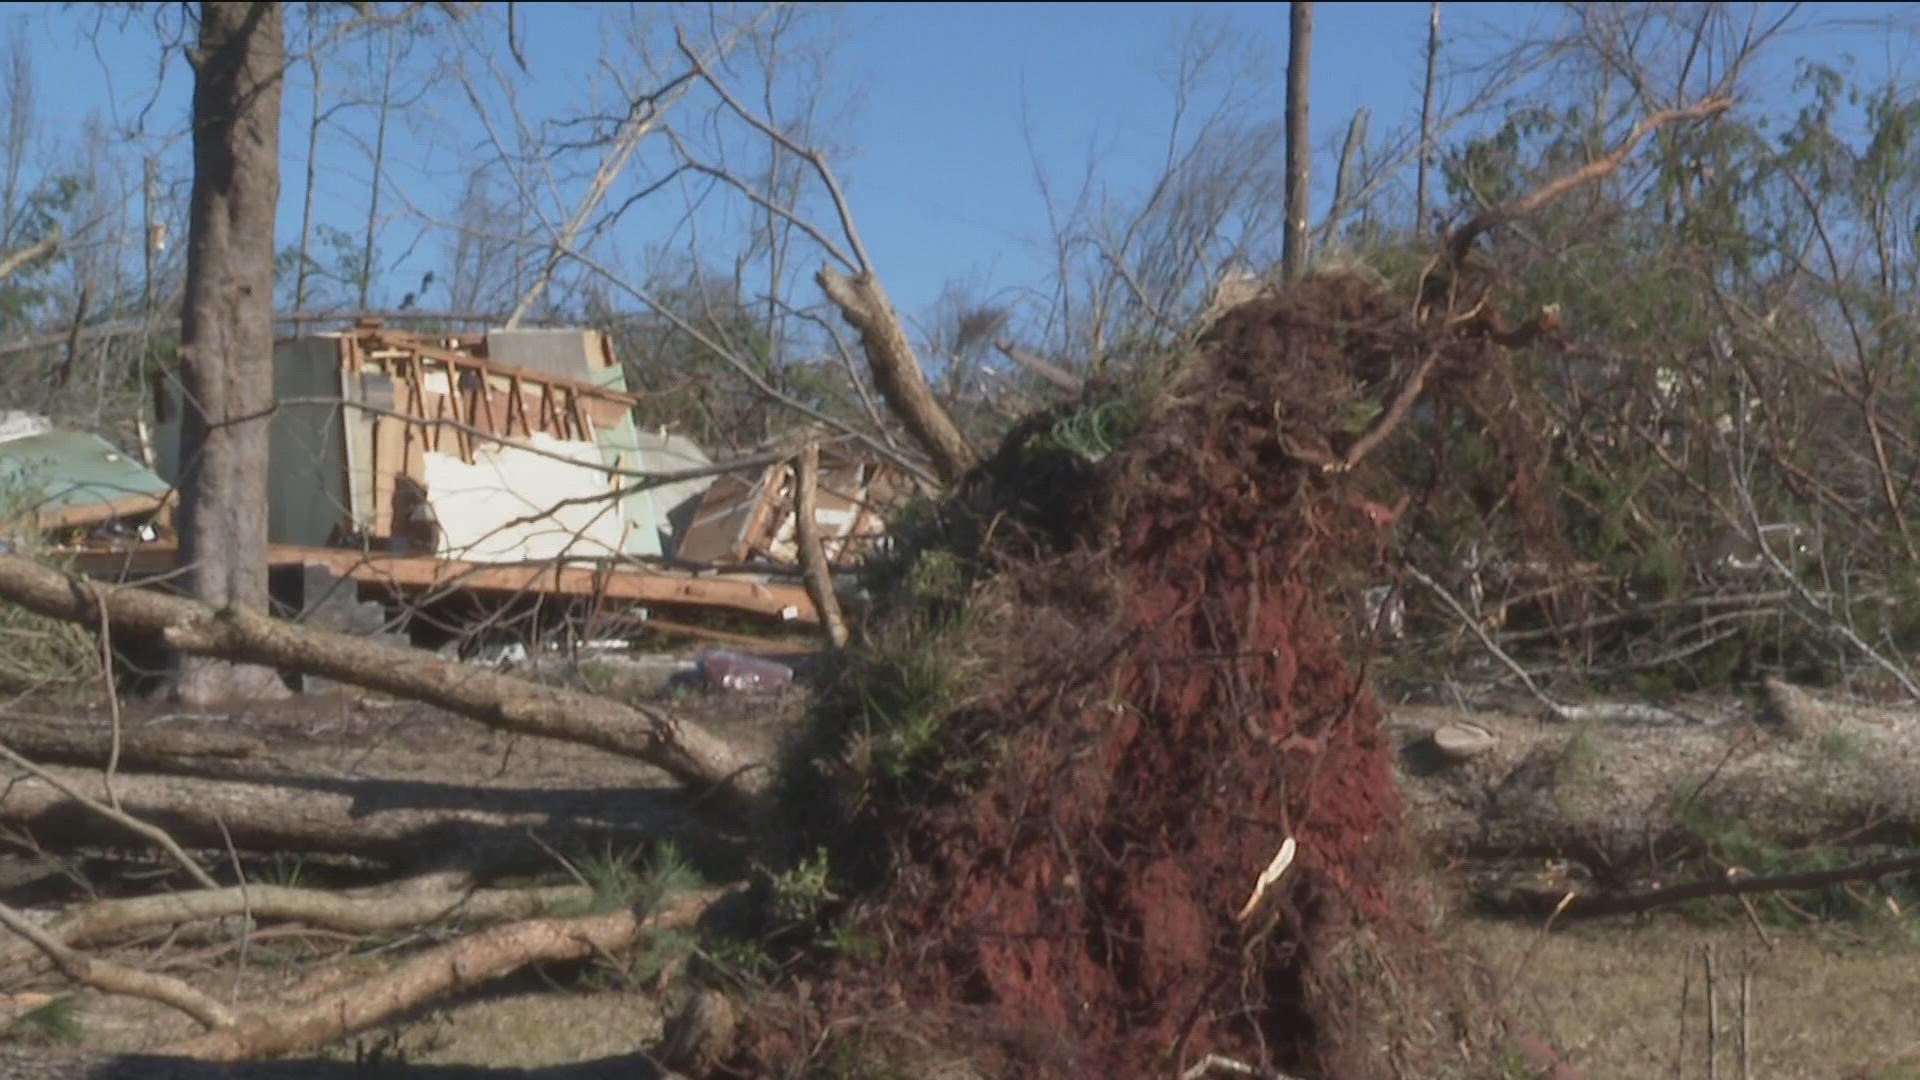 The storm cleanup continued Saturday, which was nailed with an EF-3 tornado Thursday. 11Alive's Karys Belger spent the day with families as they try to recover.